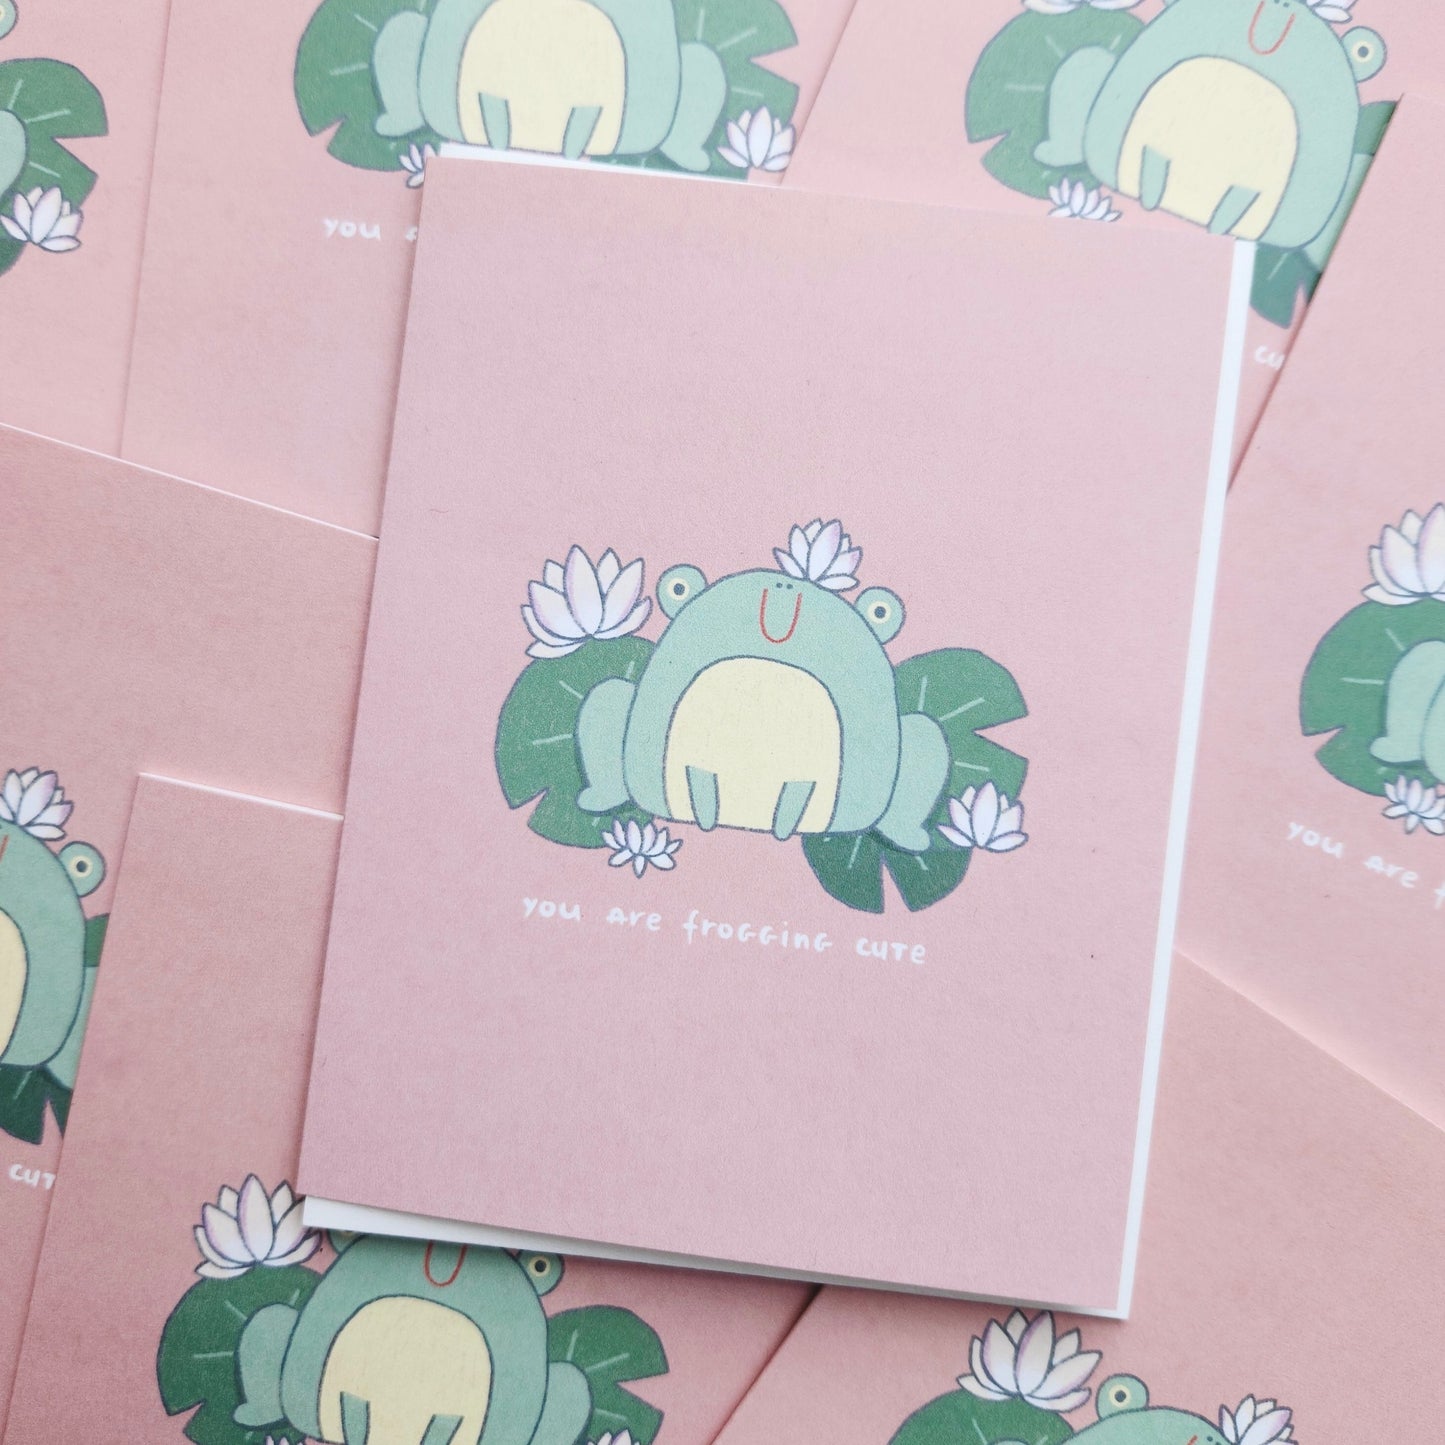 You Are Frogging Cute Pun Greeting Card